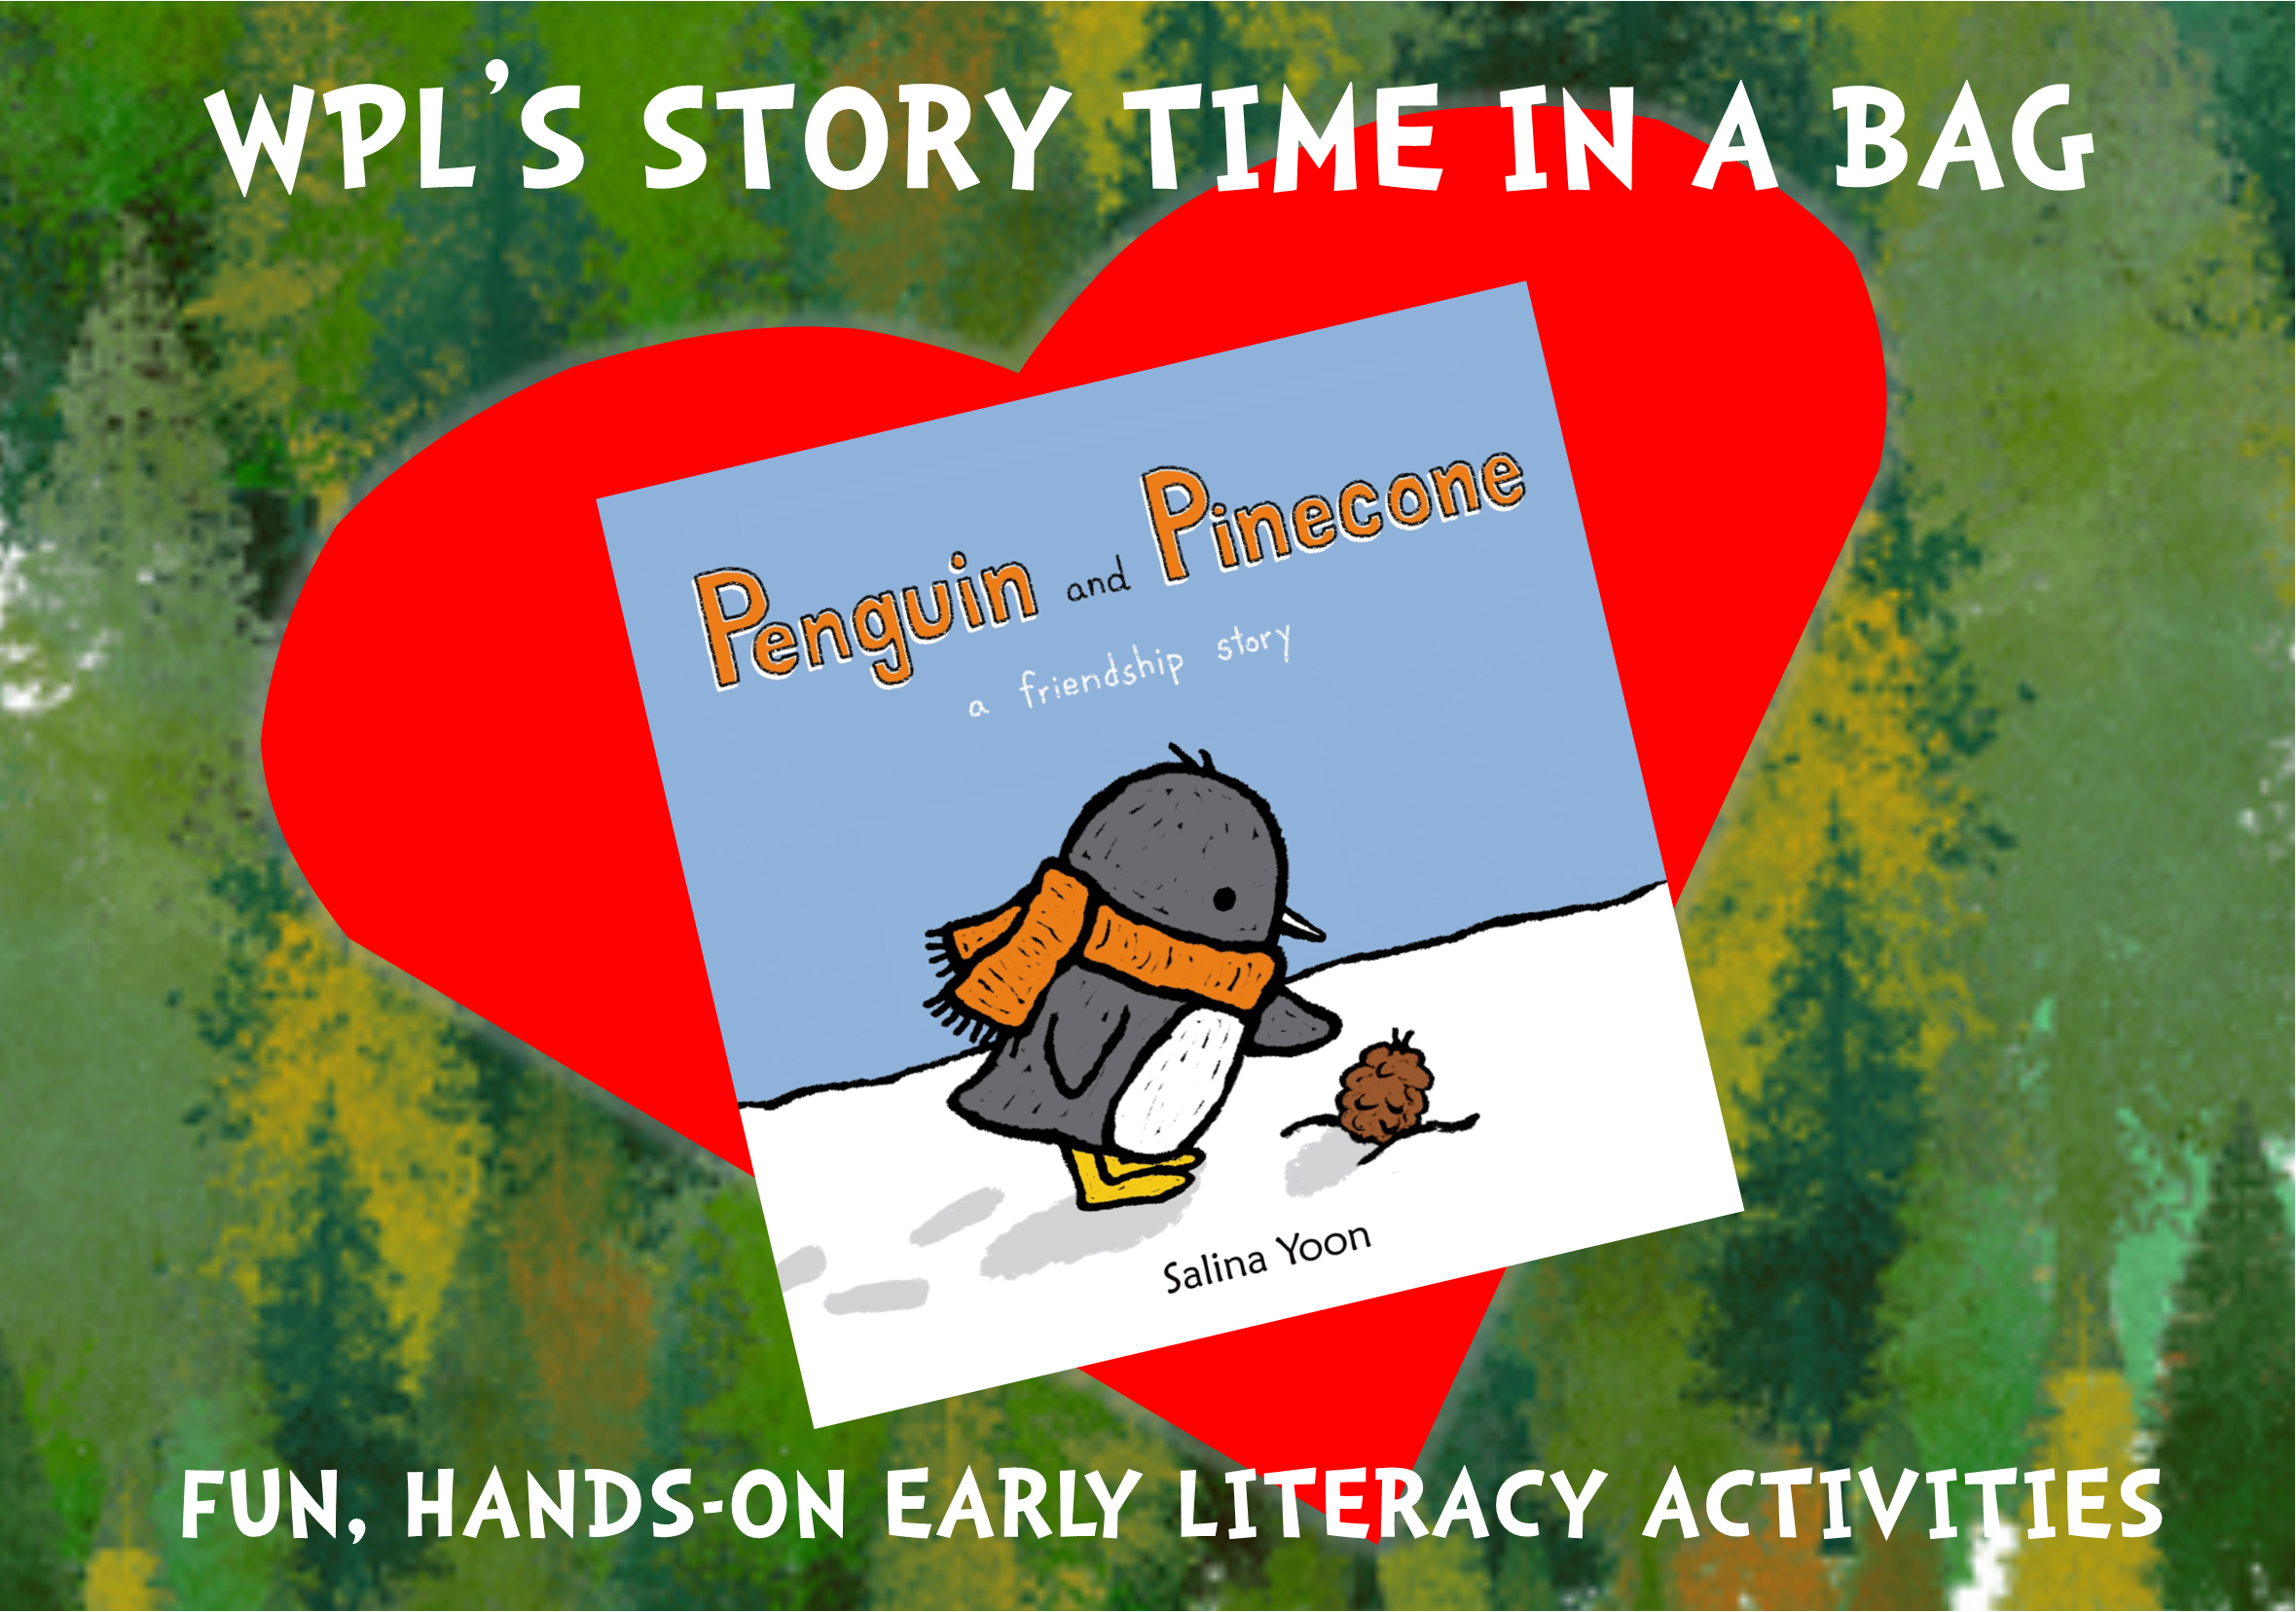 Picture of the book "Penguin and Pinecone" by Salina Yoon